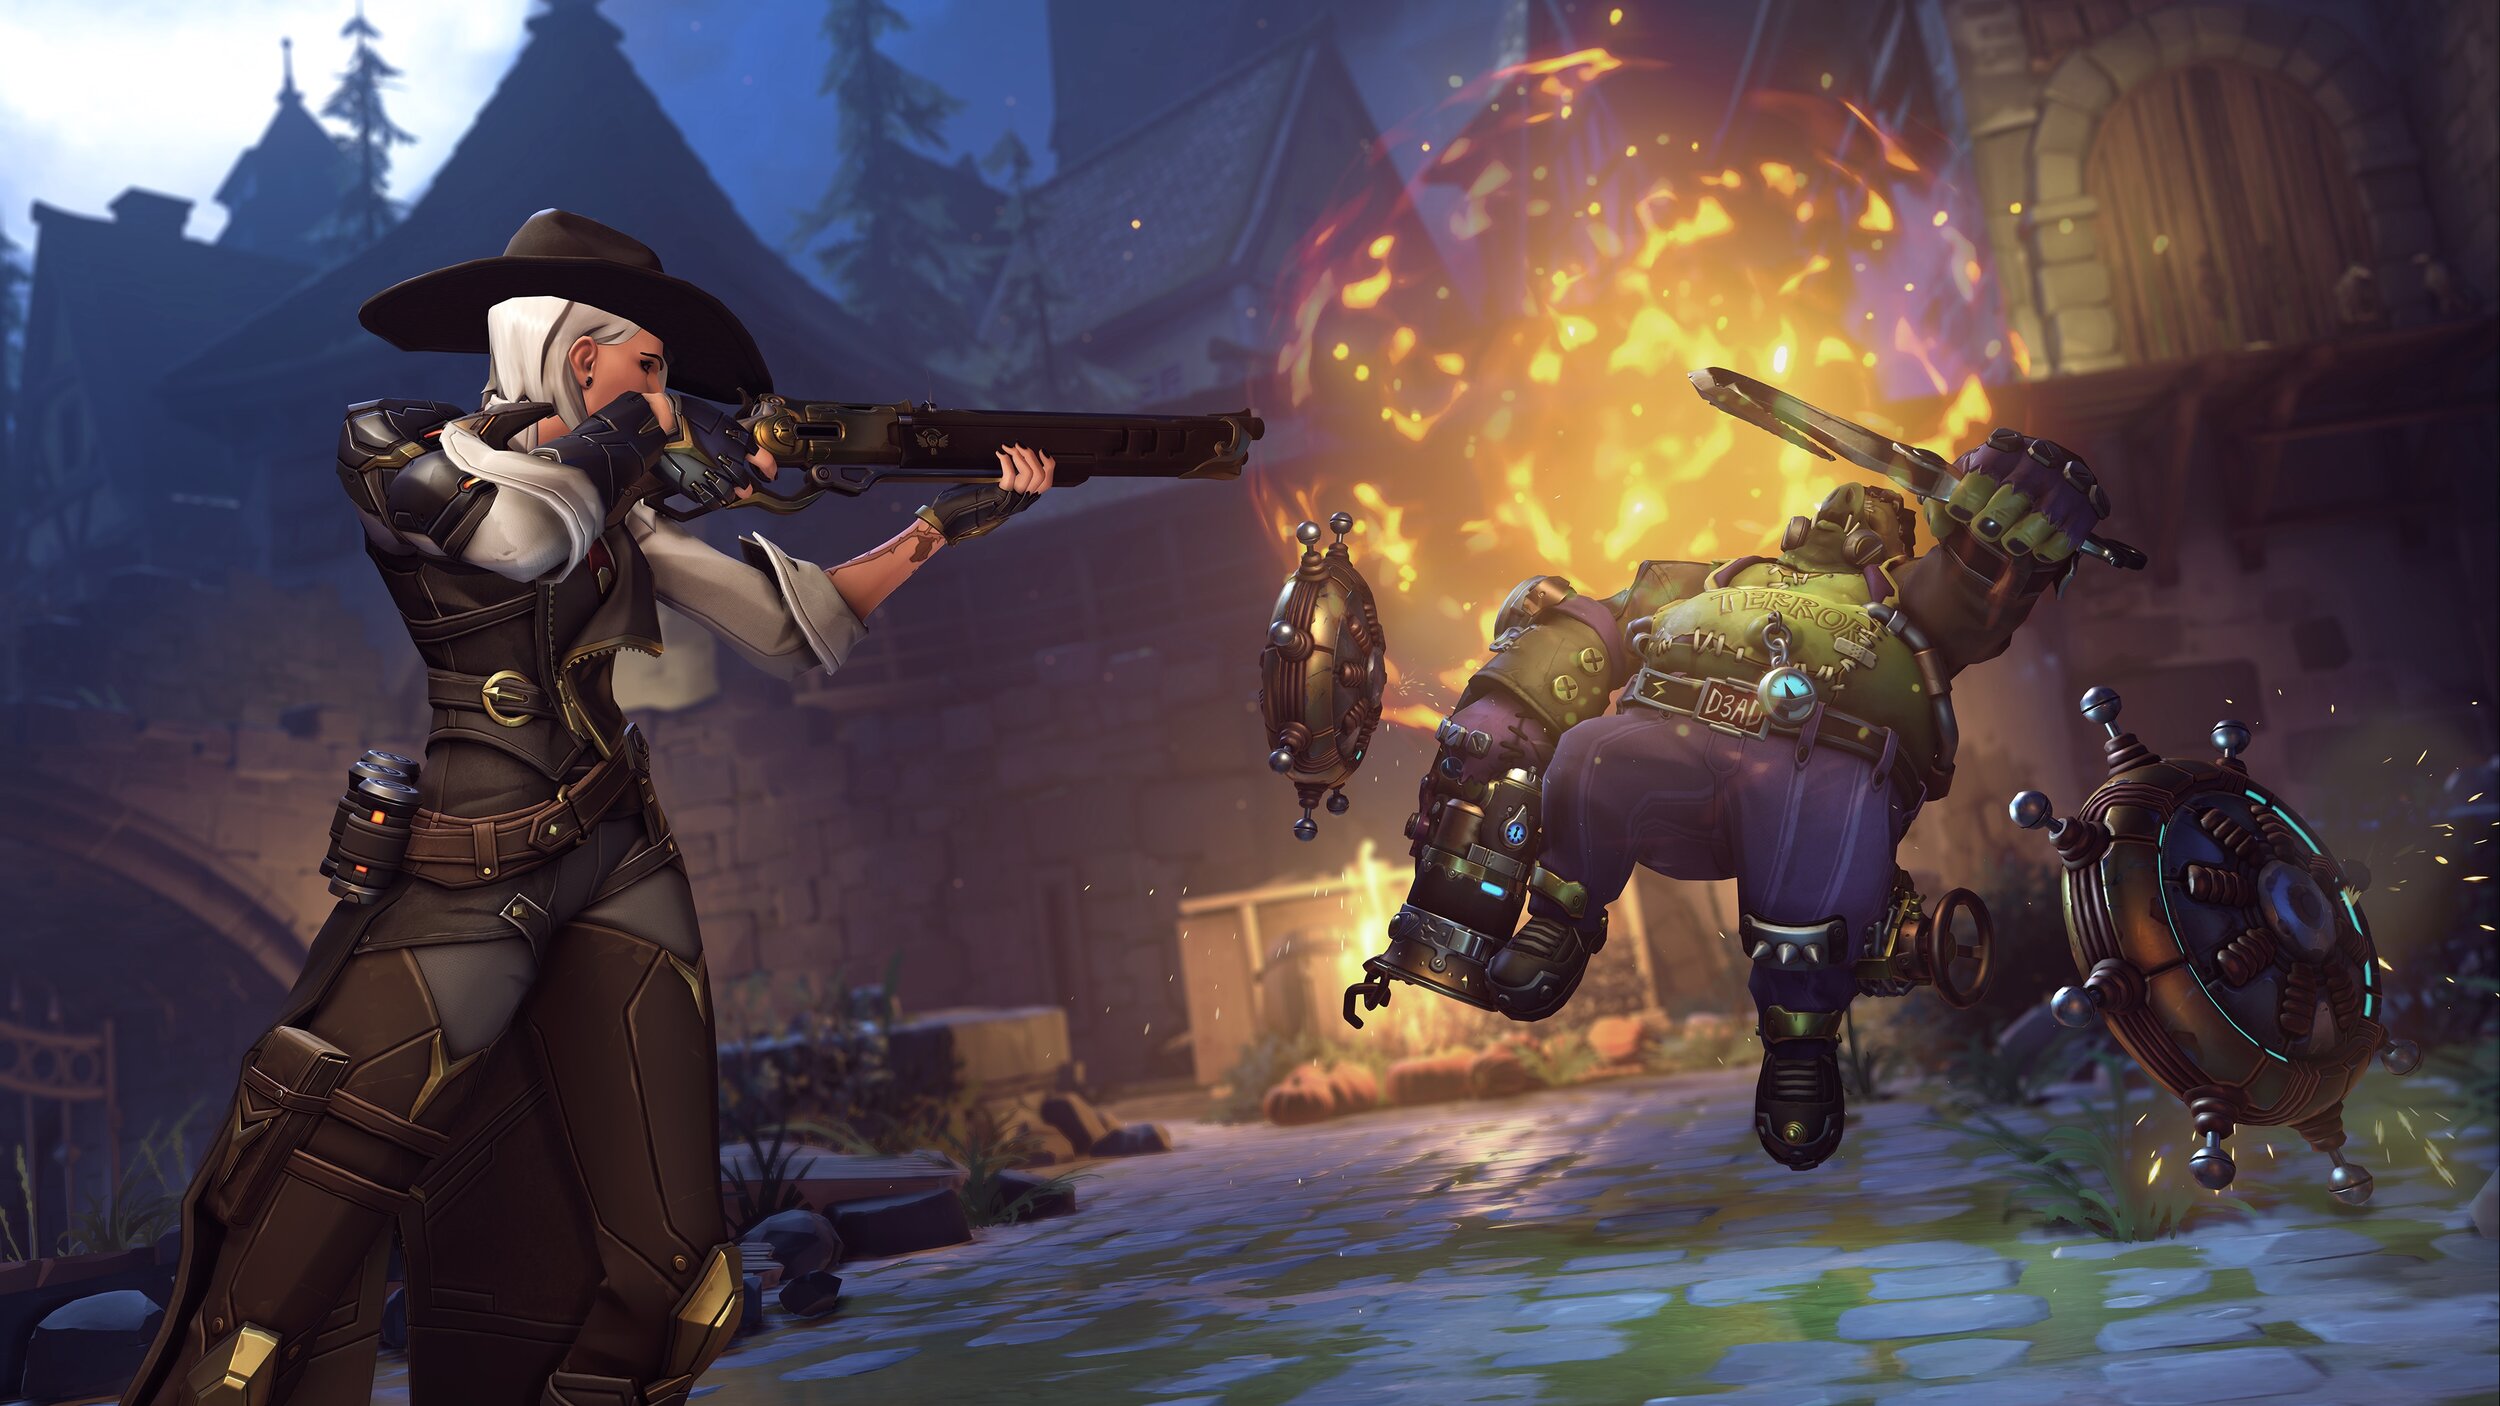 The Outlaw (Ashe) and the Renegade (Baptiste) have come to Adlersbrunn to test their mettle against Junkenstein’s creations.jpg